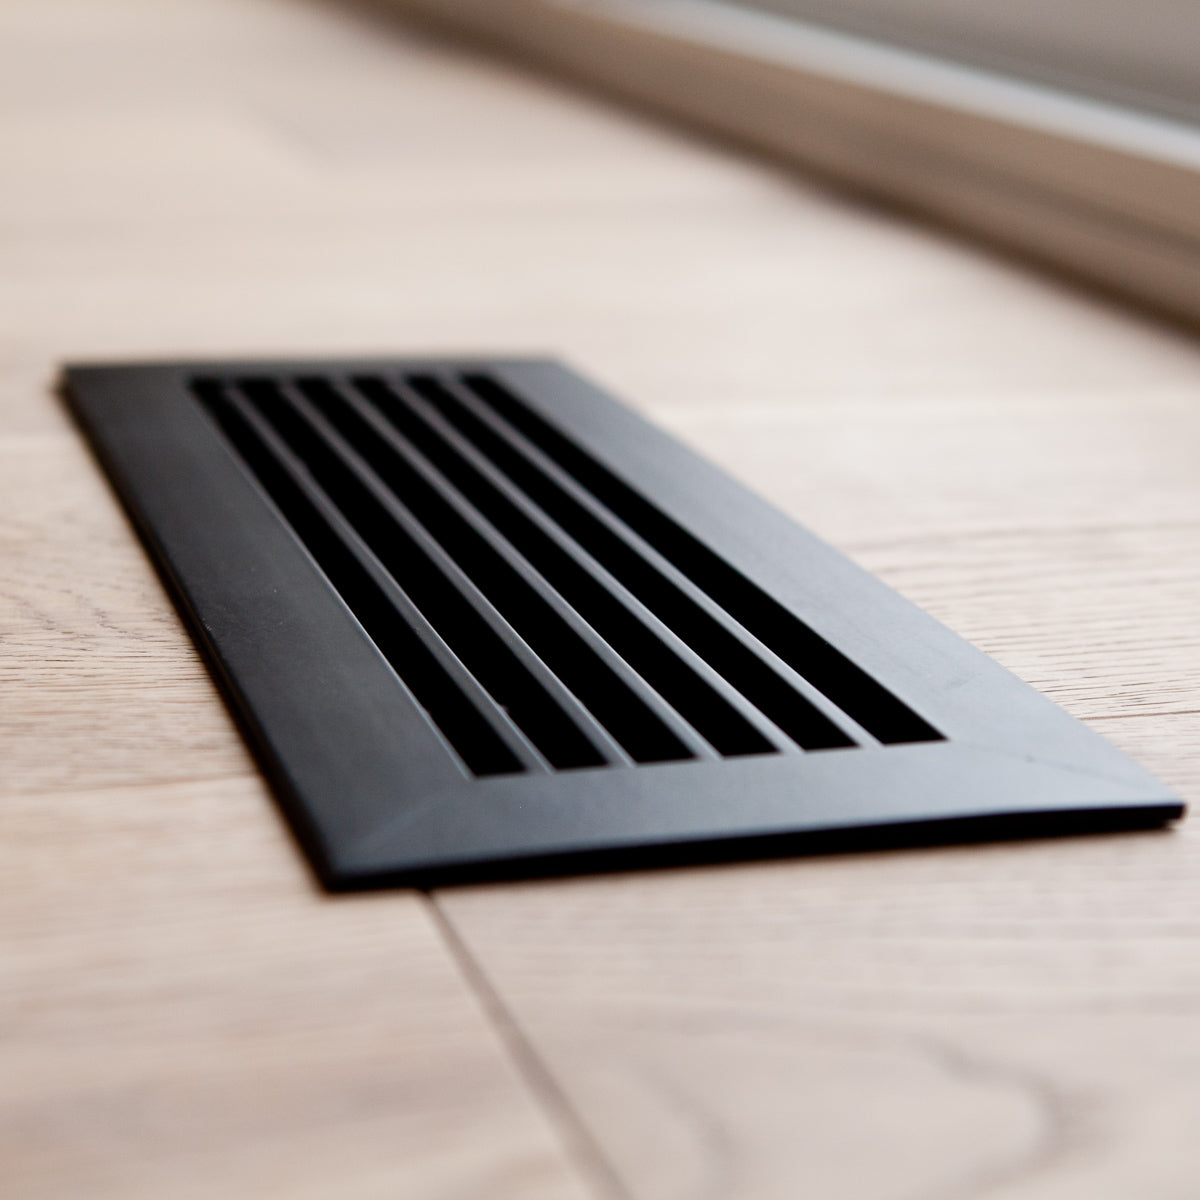 Parallel Heating Vent Mdrn Design Group Inc